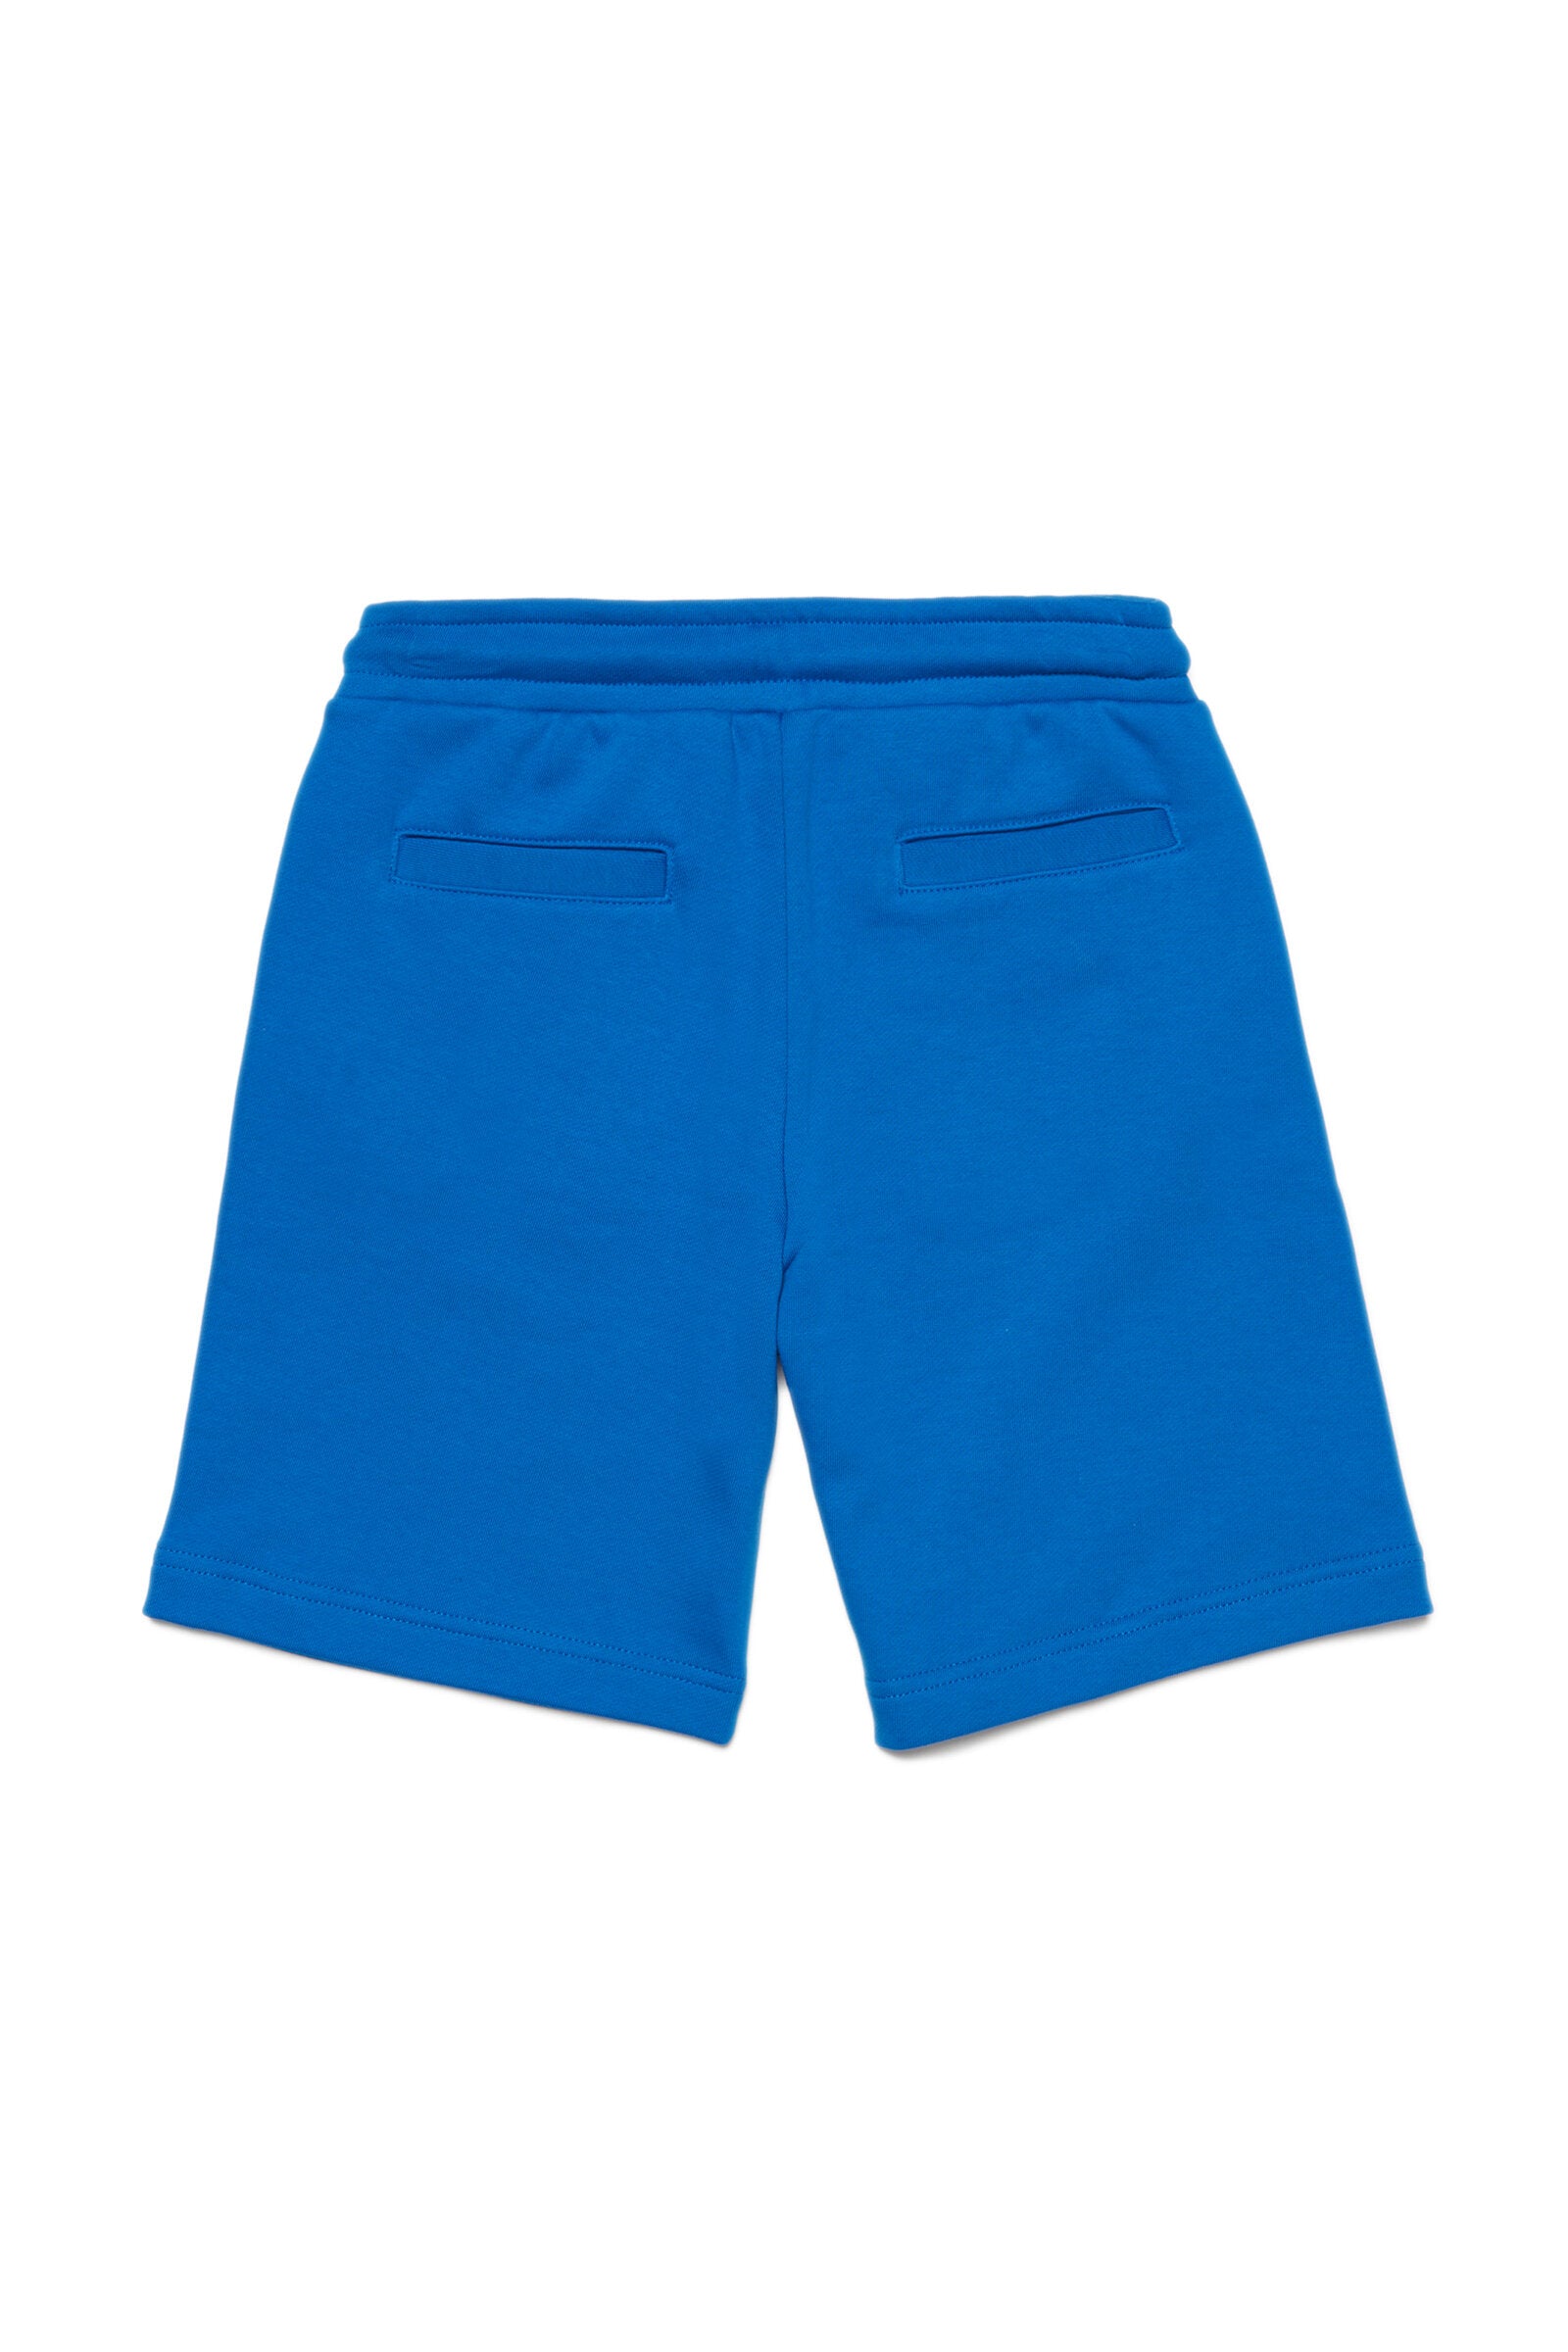 Blue cotton shorts with logo and drawstring waistband